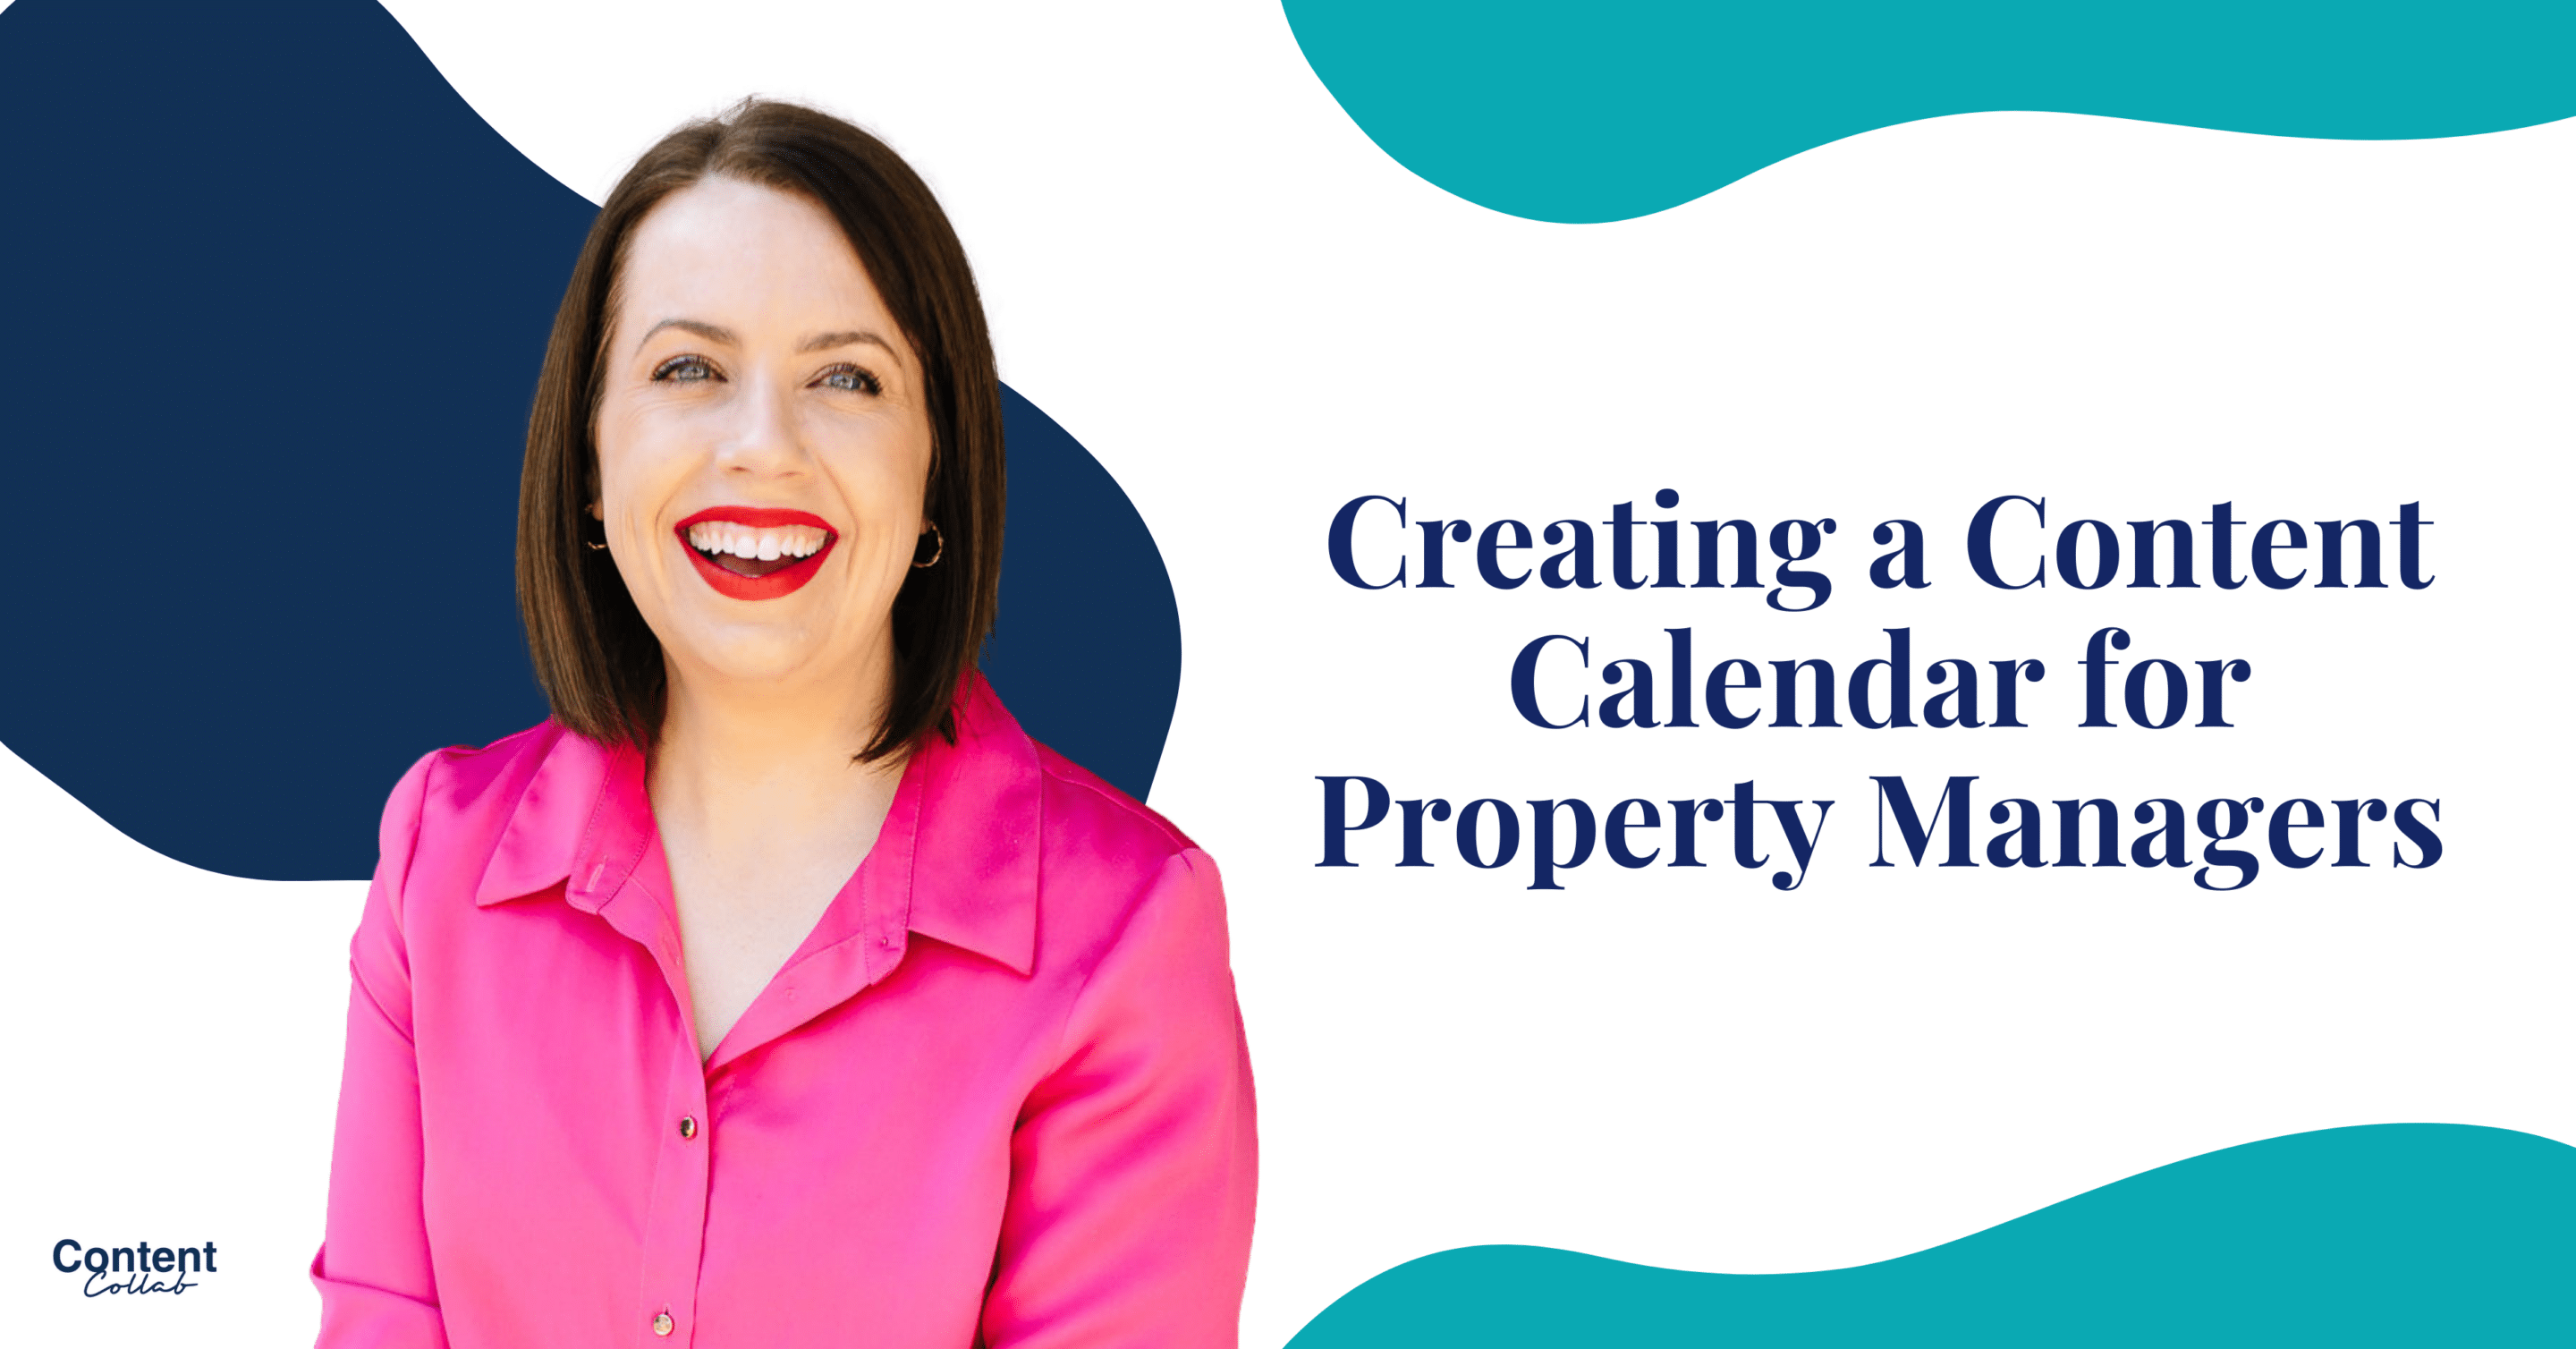 Creating a Content Calendar for Property Managers